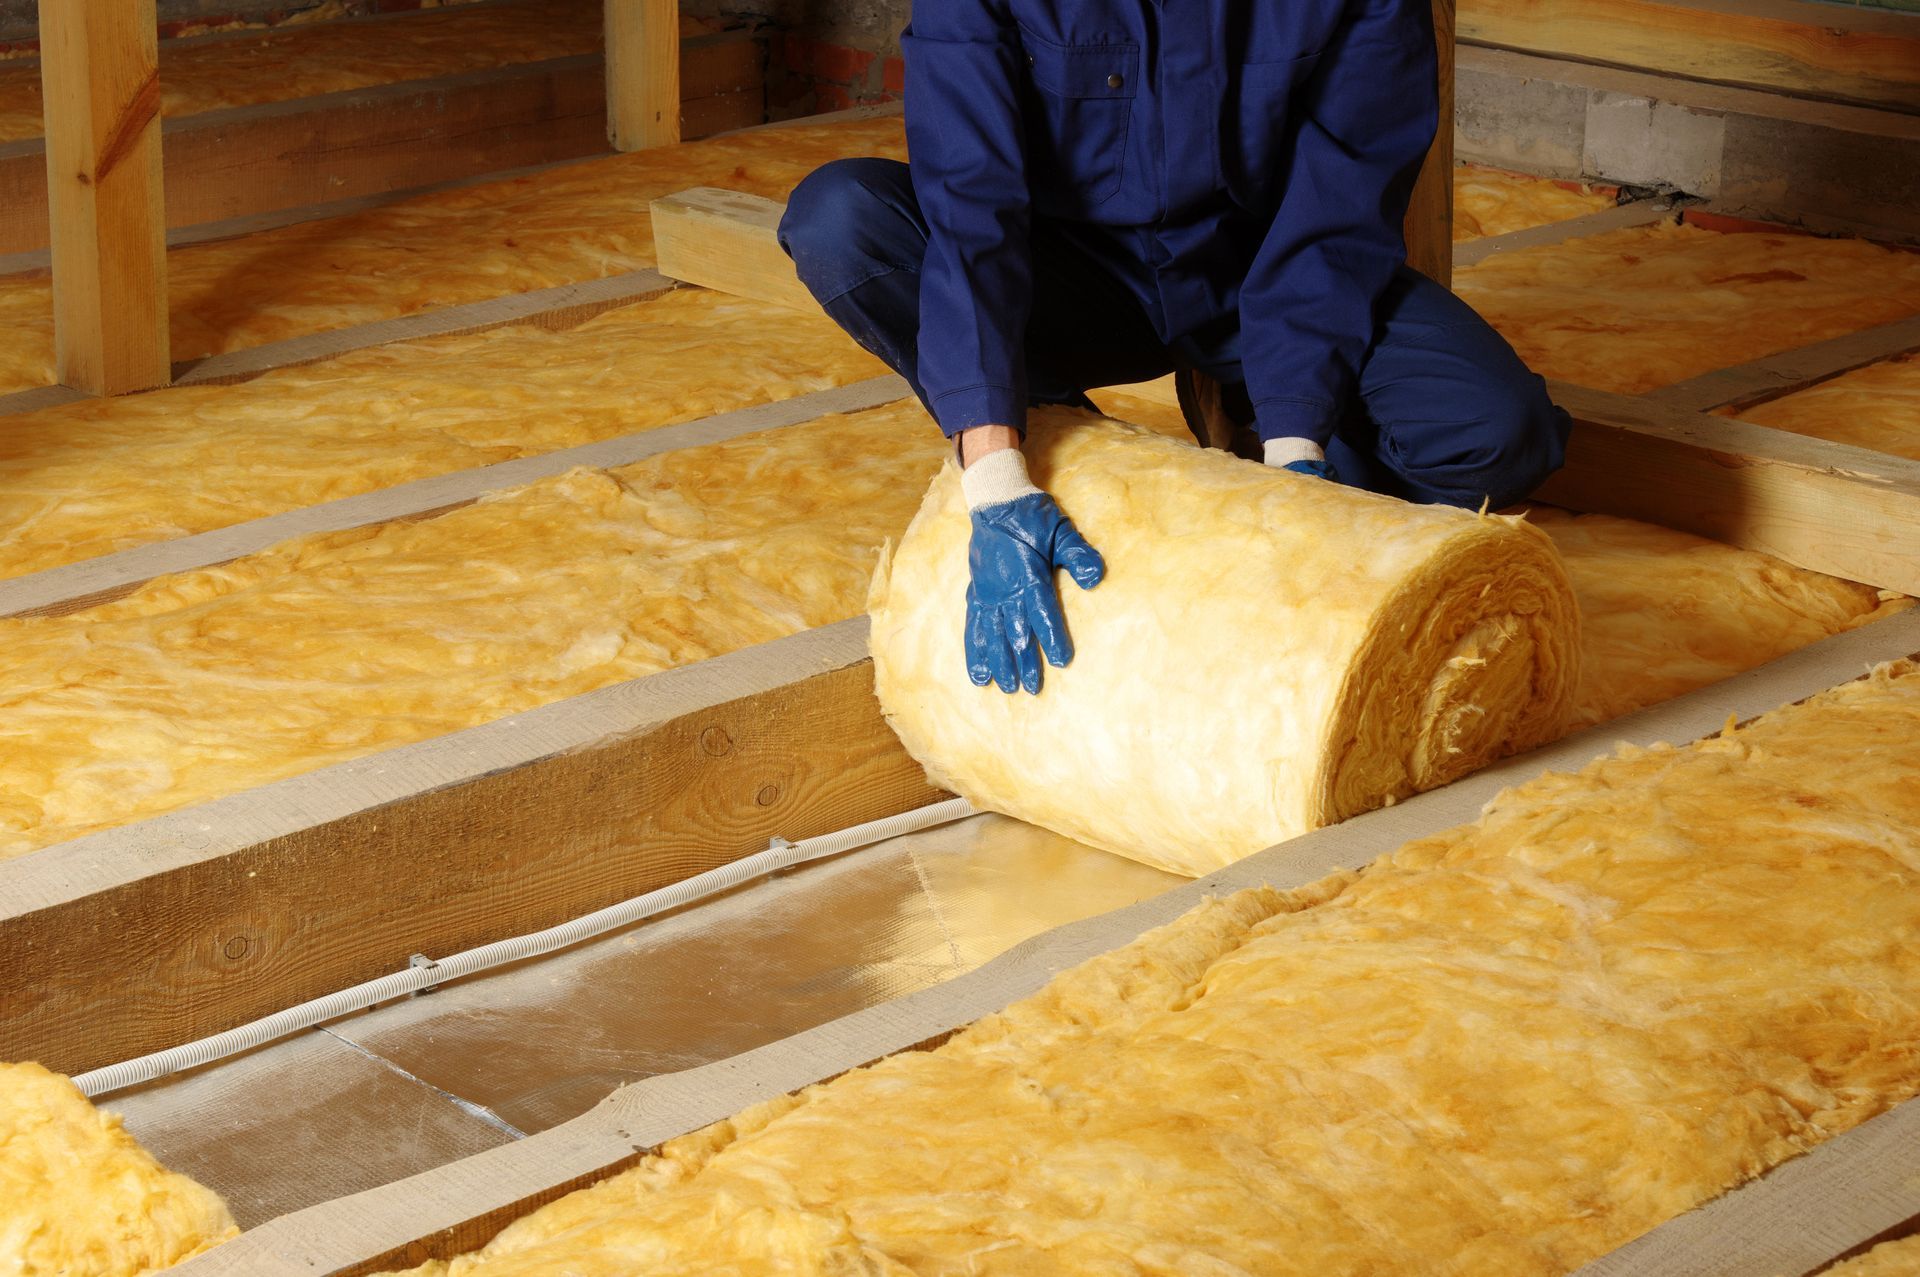 A man is kneeling on the floor holding a roll of insulation.